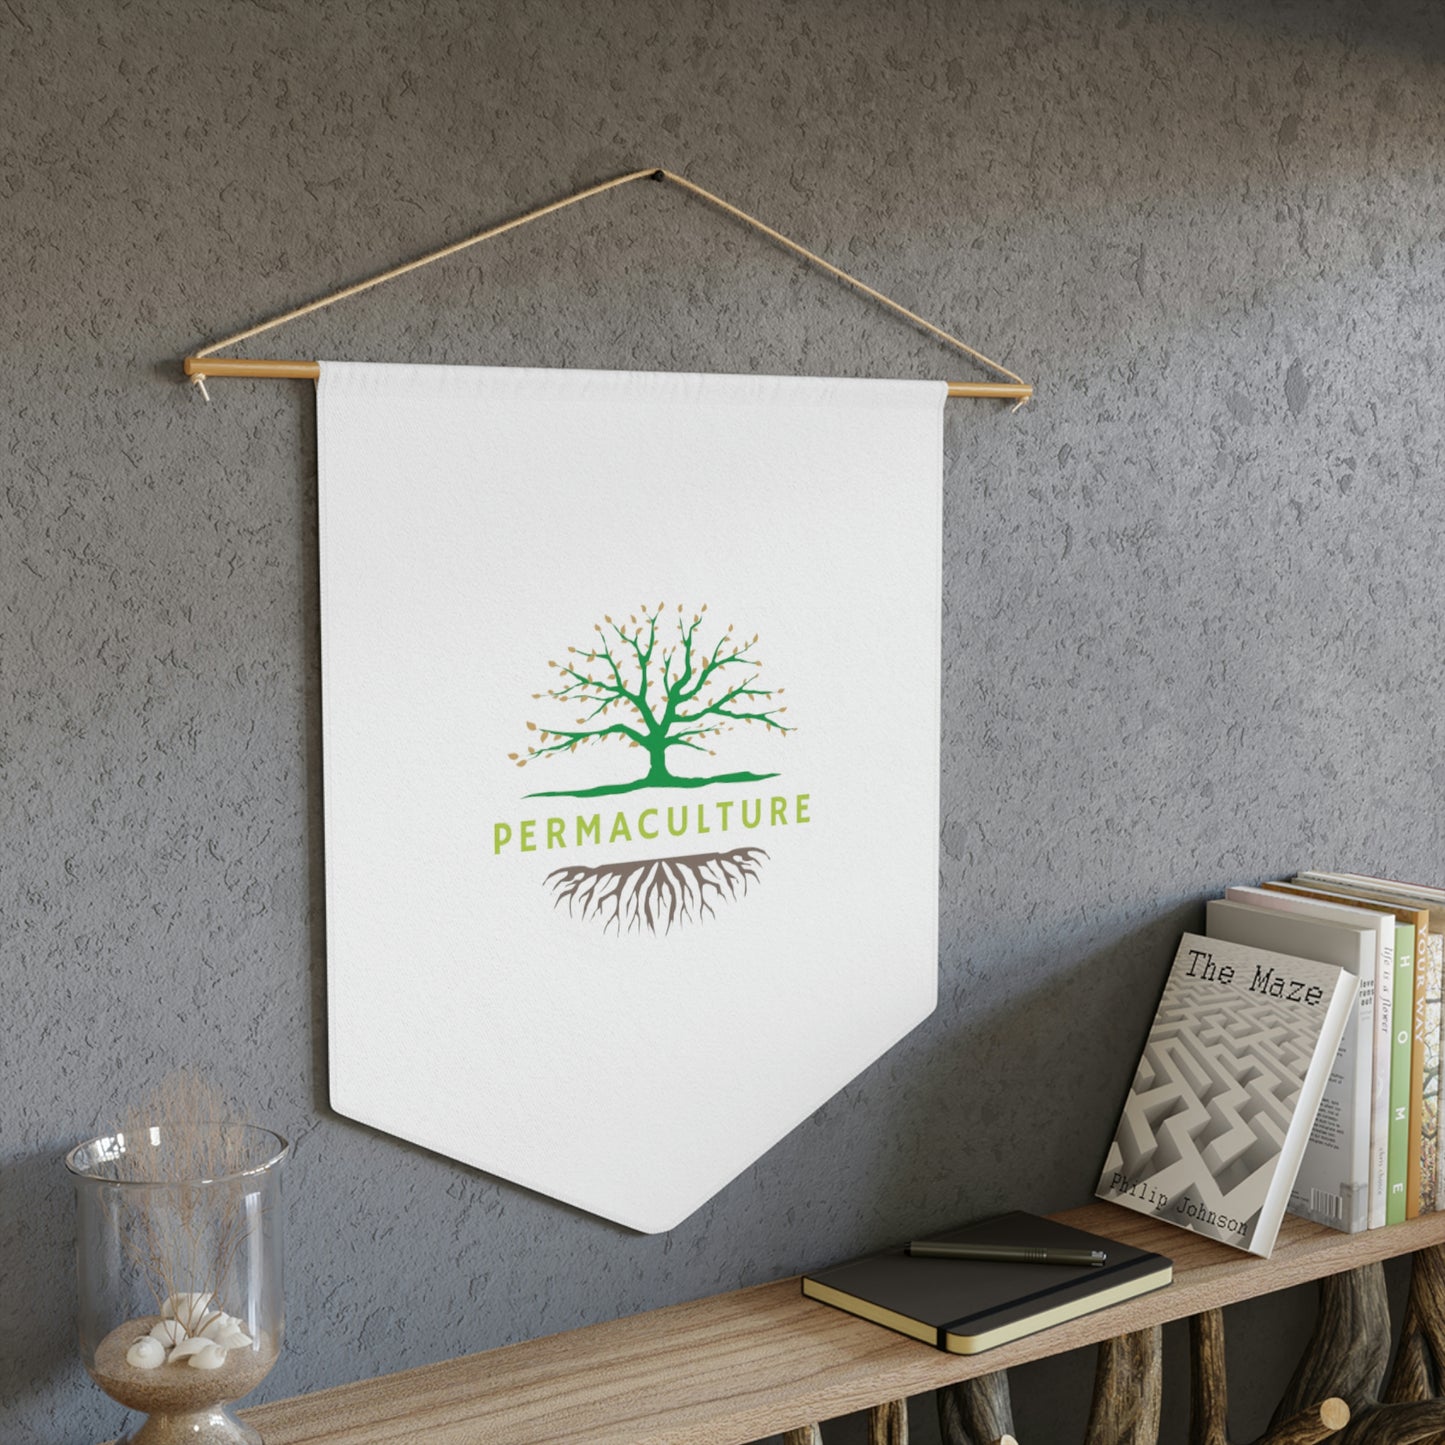 Permaculture Pennant - White